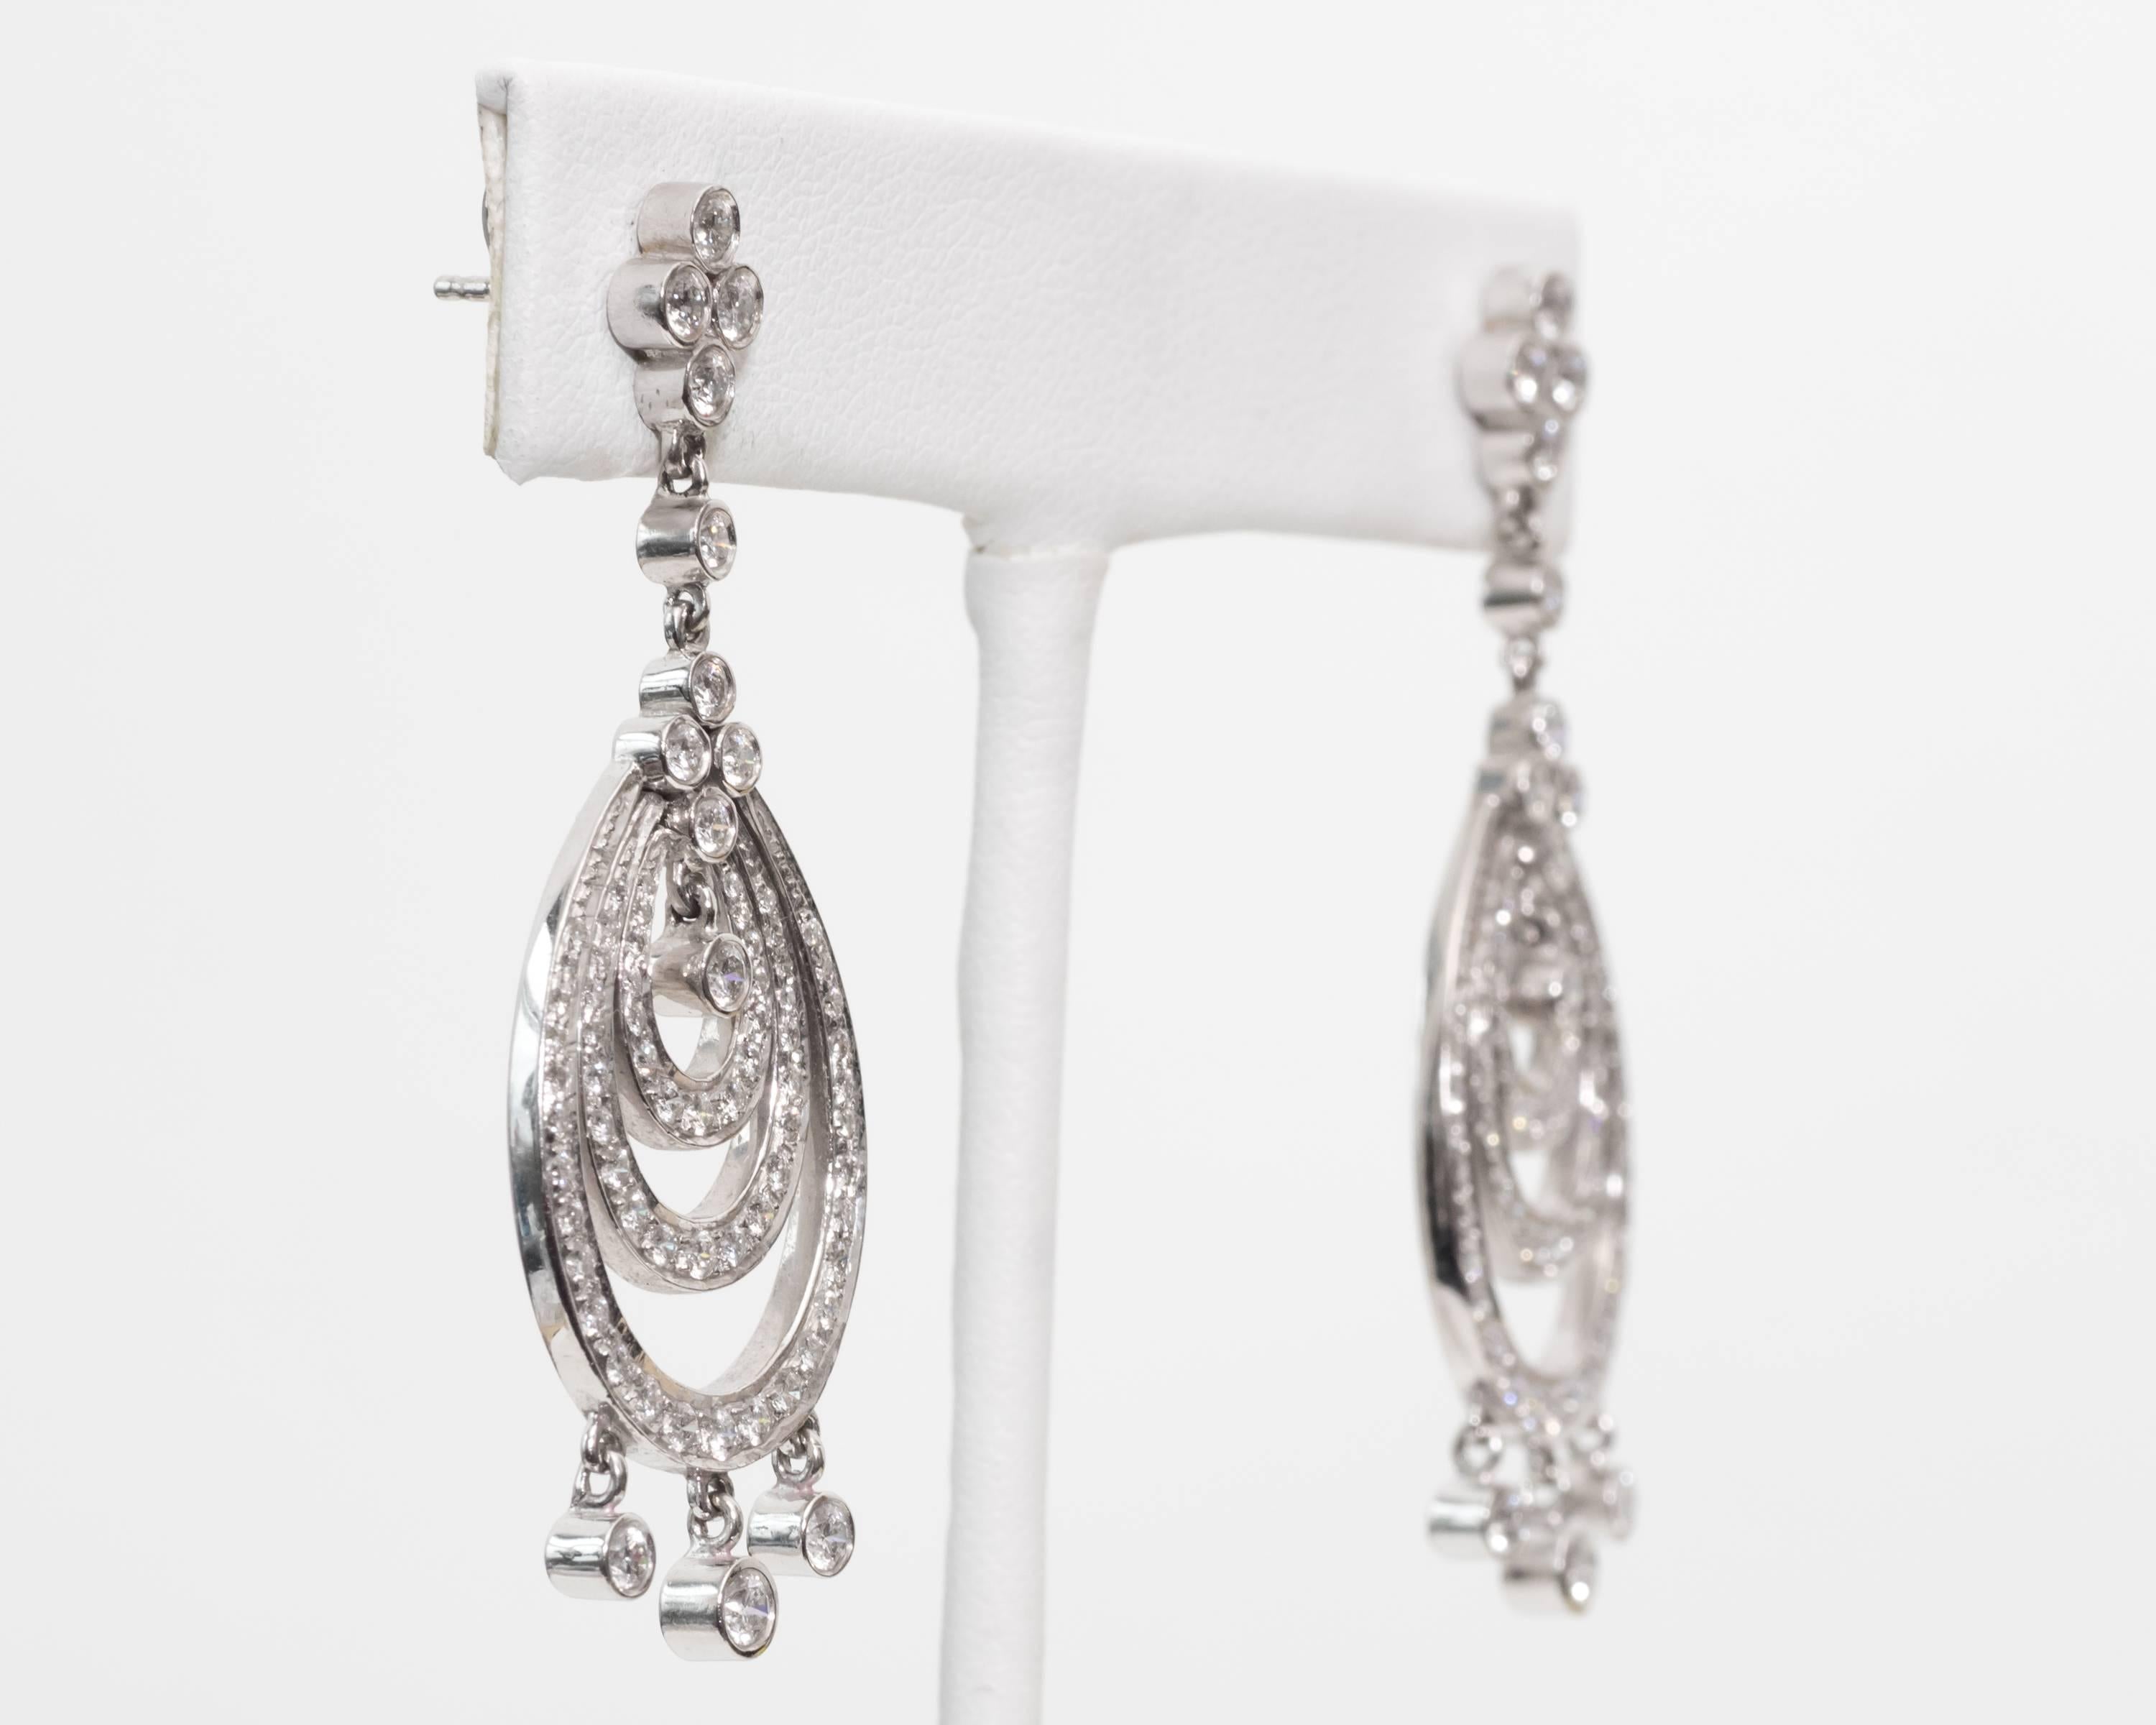 Luxurious earrings with stunning diamonds inlayed throughout the entire
surface area 
Diamonds are positioned along the pear-shaped cutouts on the front face of the earring
Additional diamonds are set in bezel frames that dangle with more diamonds